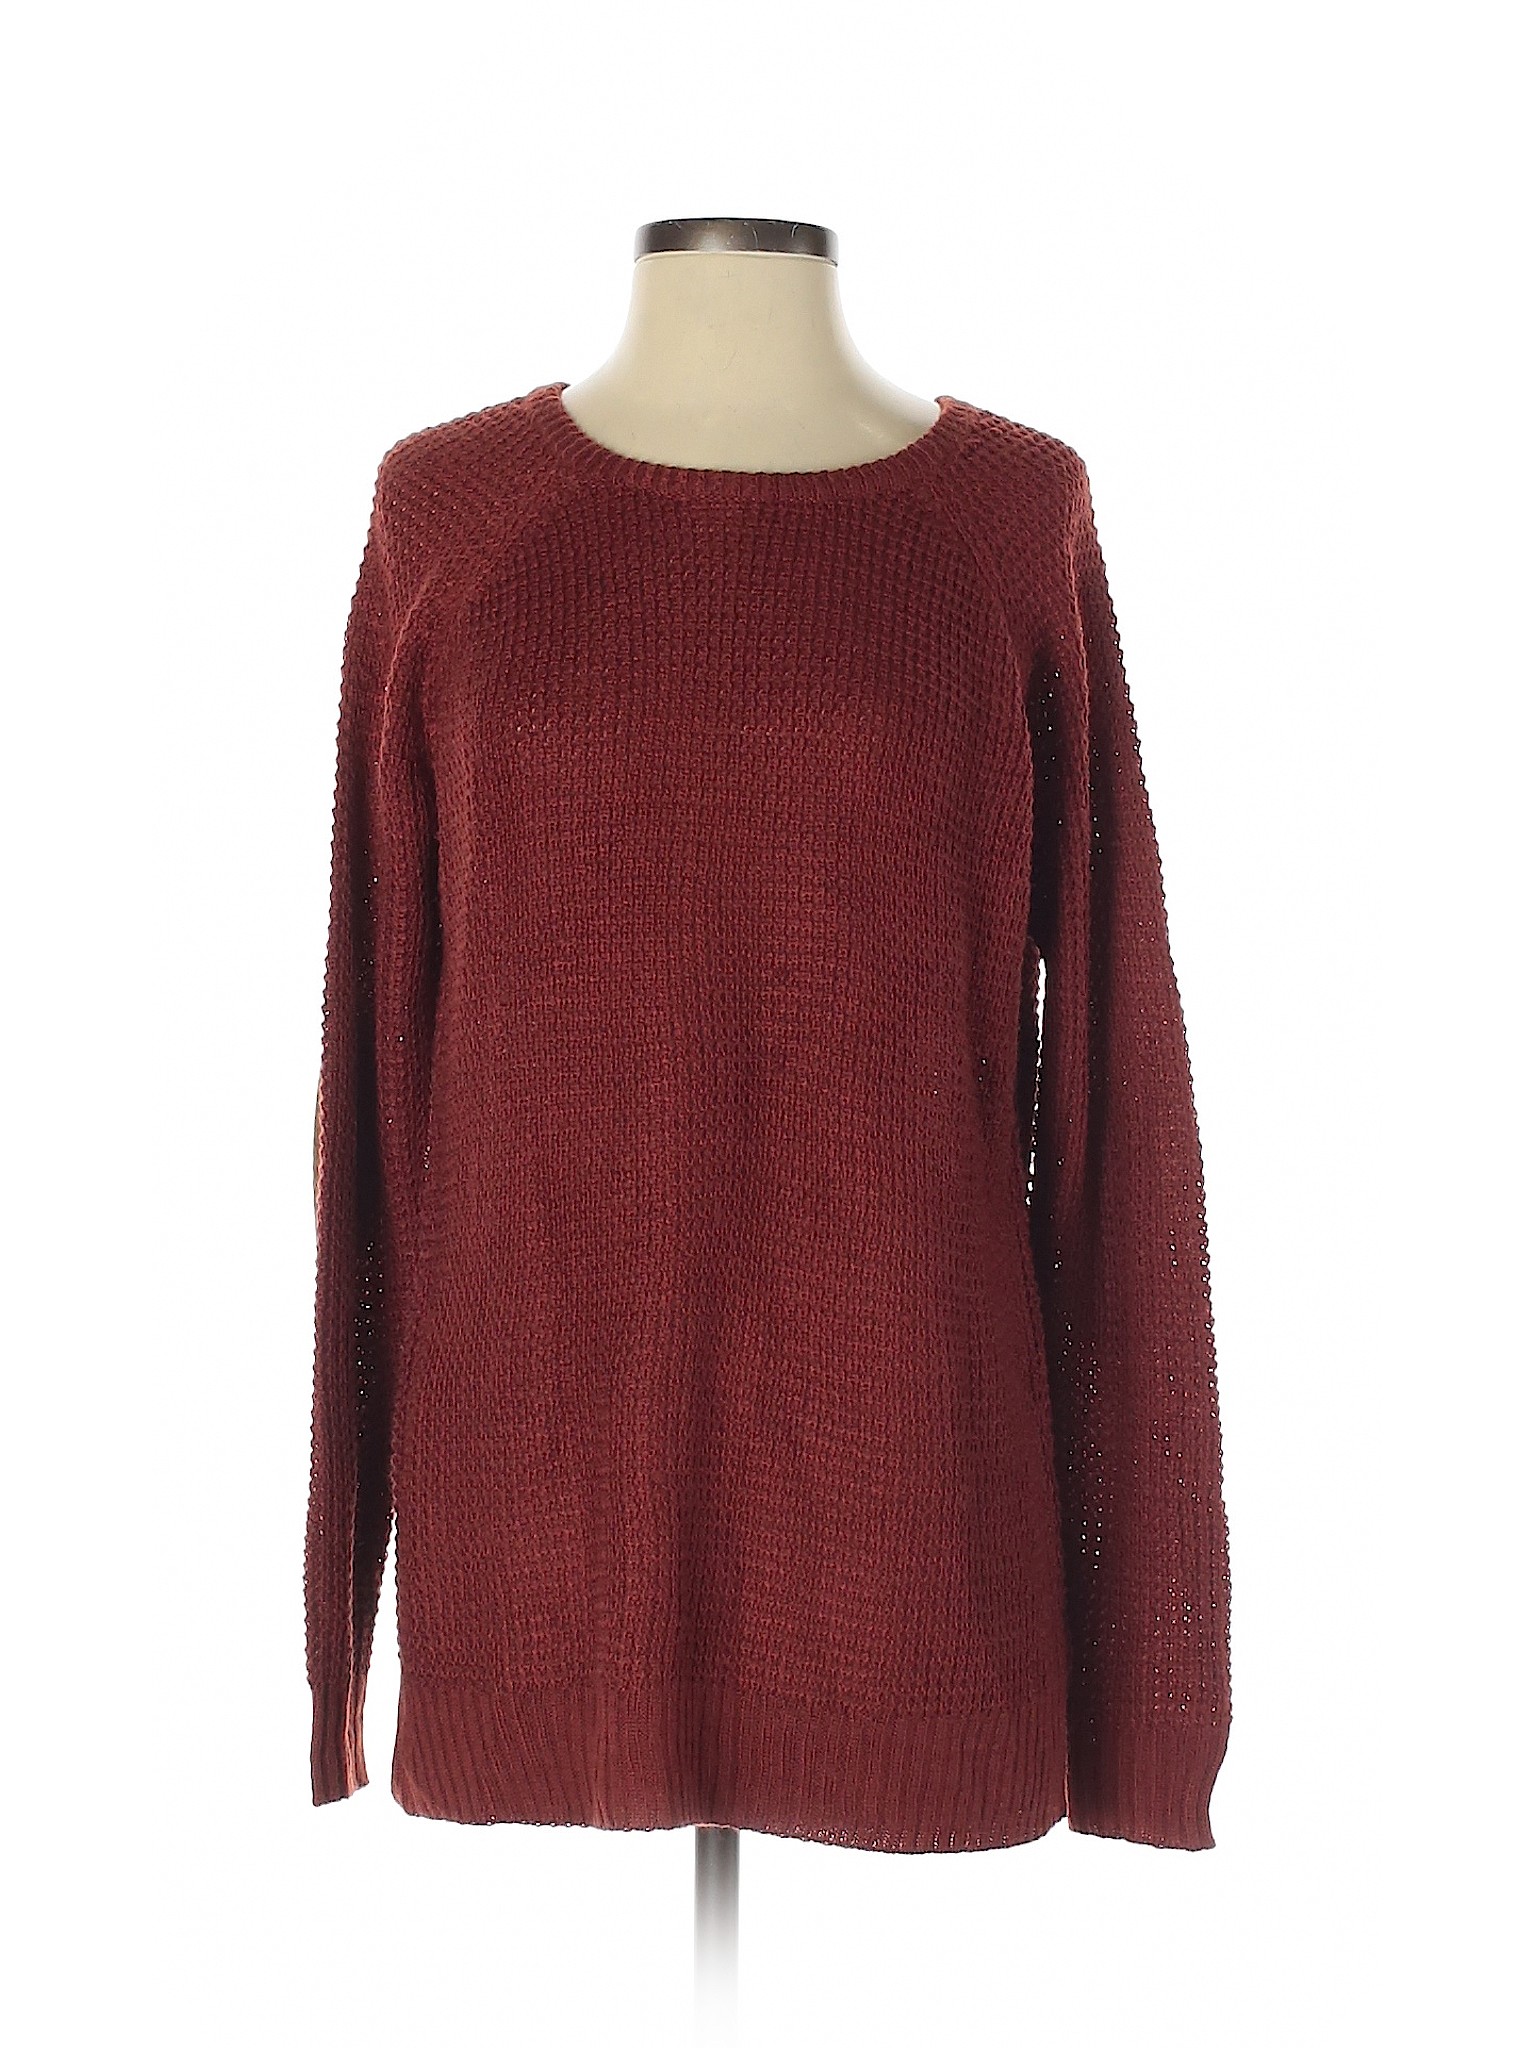 Staccato Women Red Pullover Sweater S | eBay